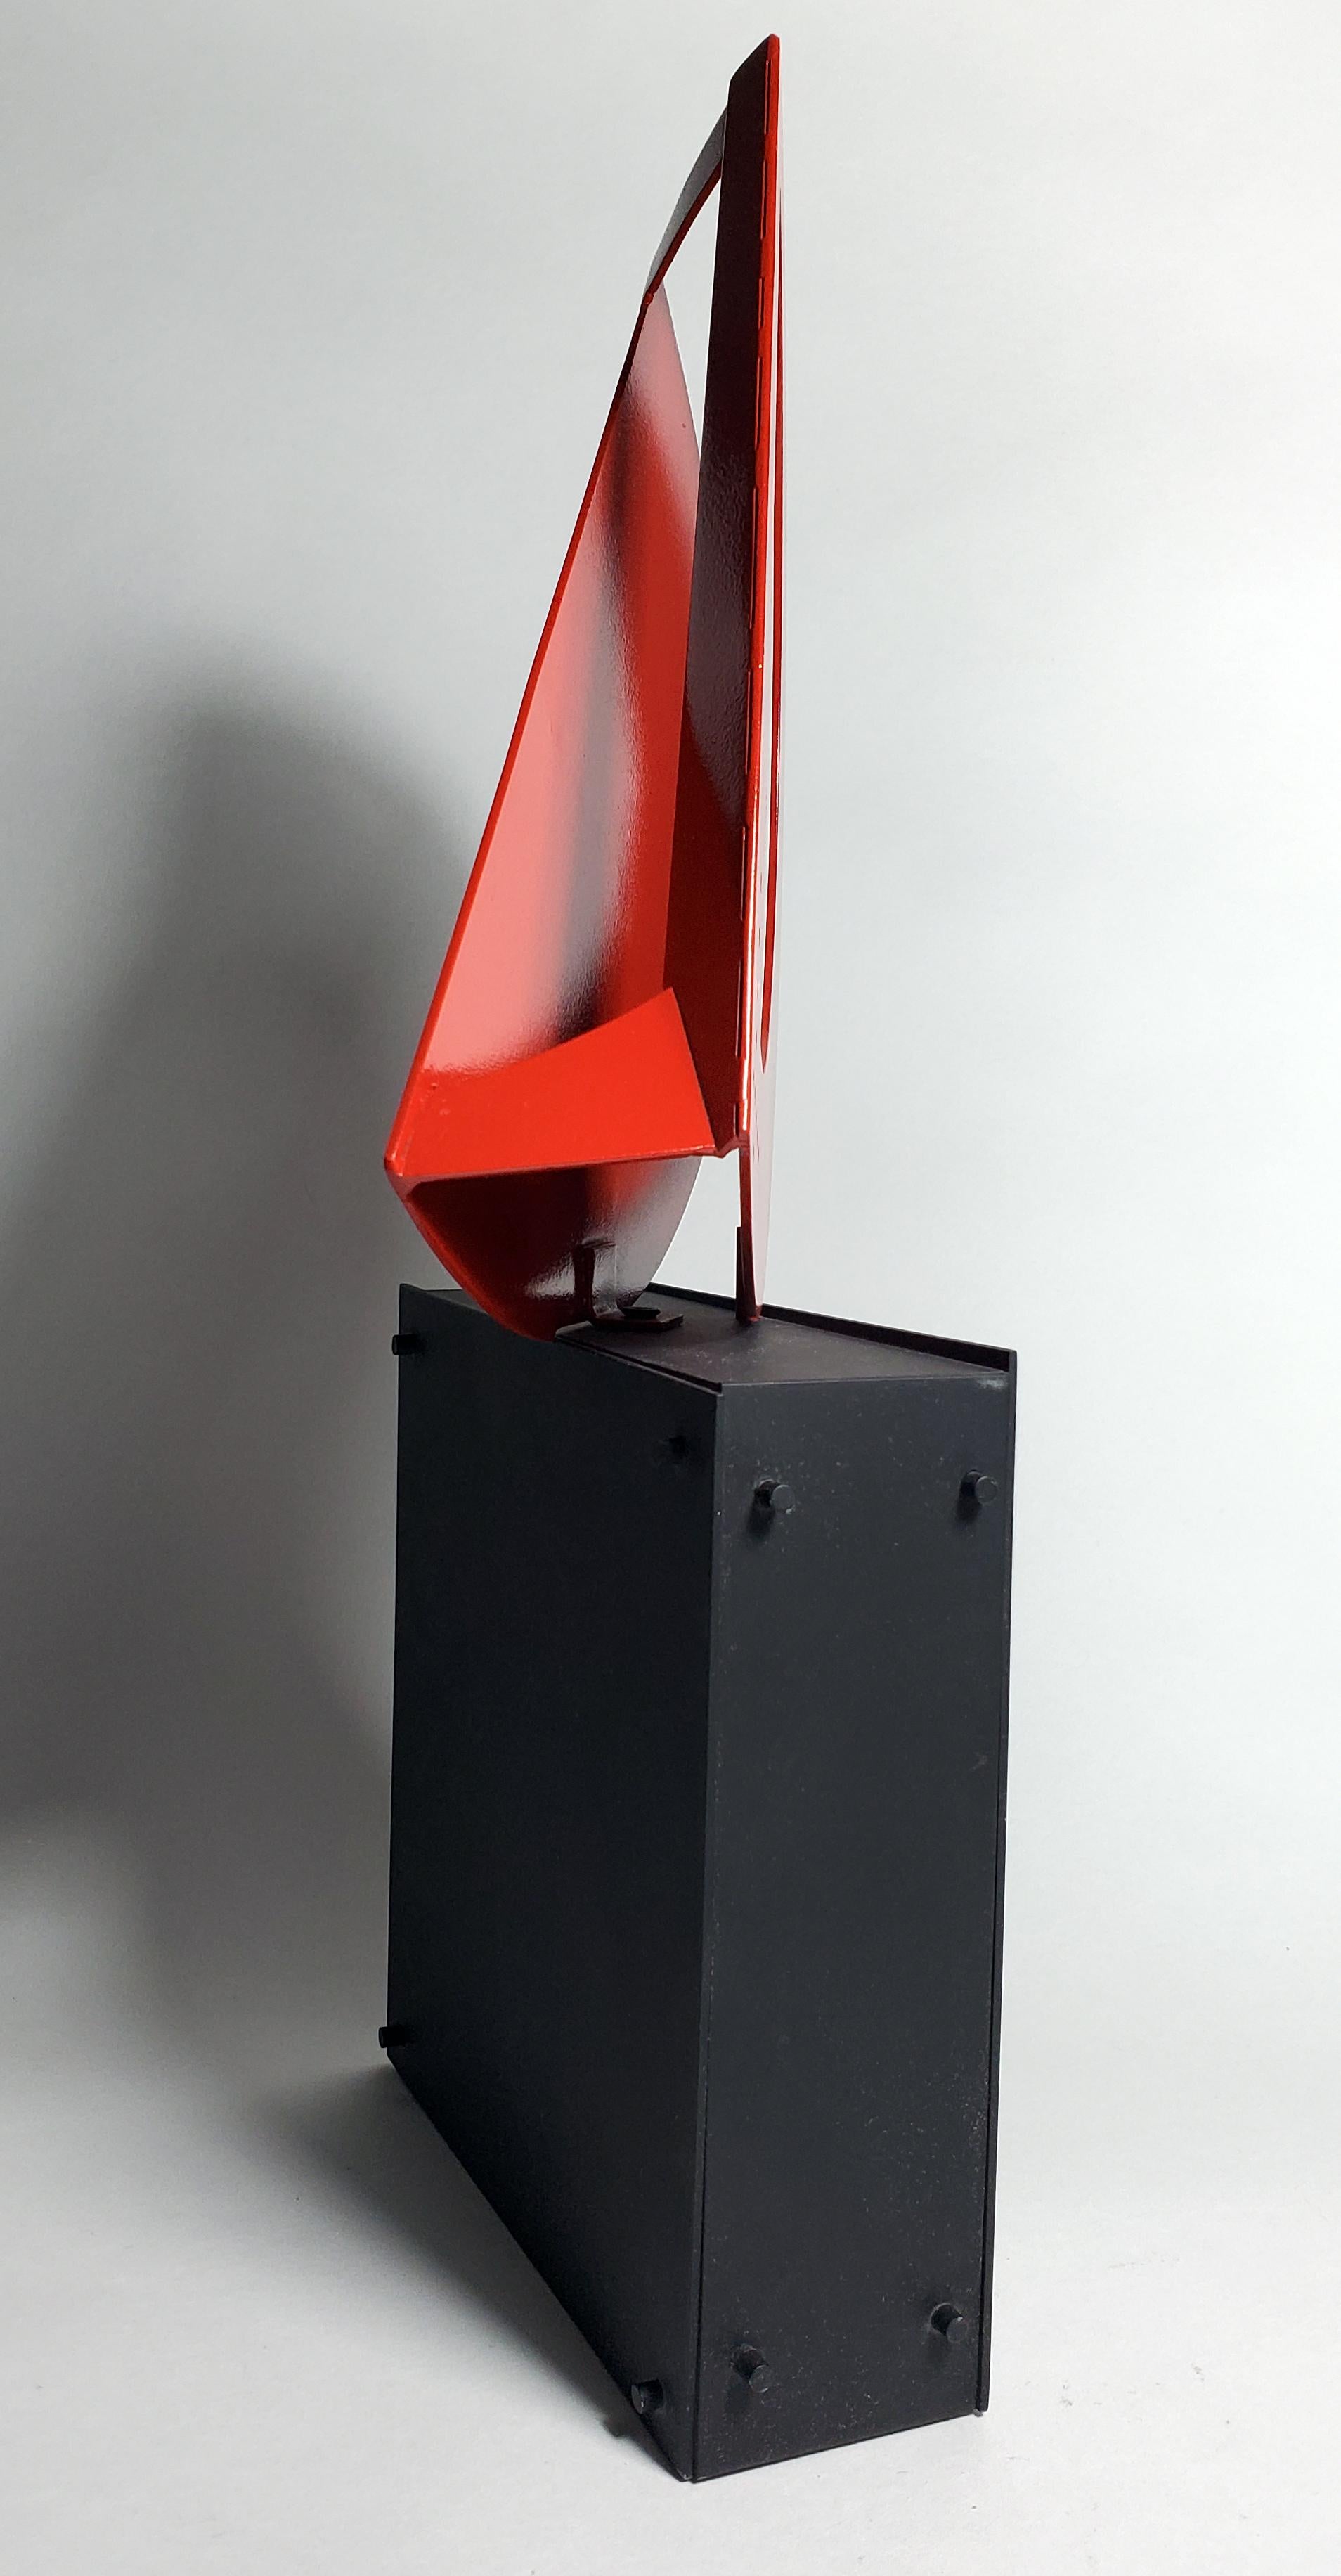 Dynamic red sculpture embracing the principles of Constructivism, 